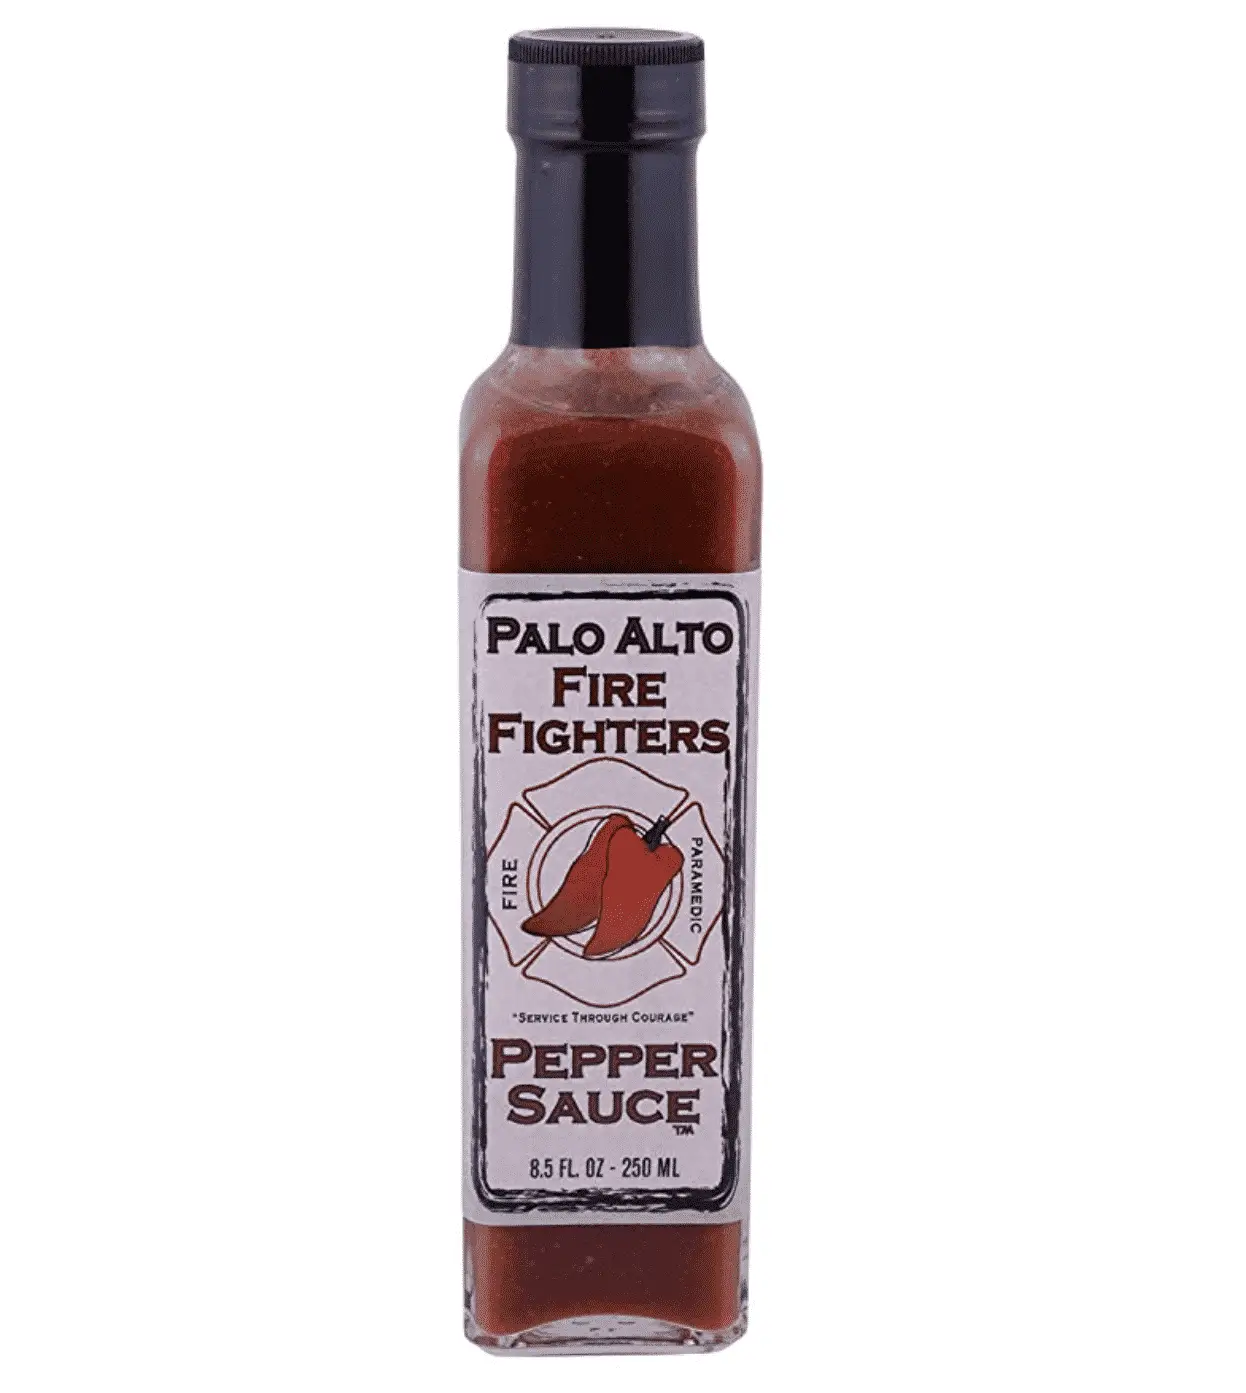 Palo Alto Firefighters Pepper Sauce Review